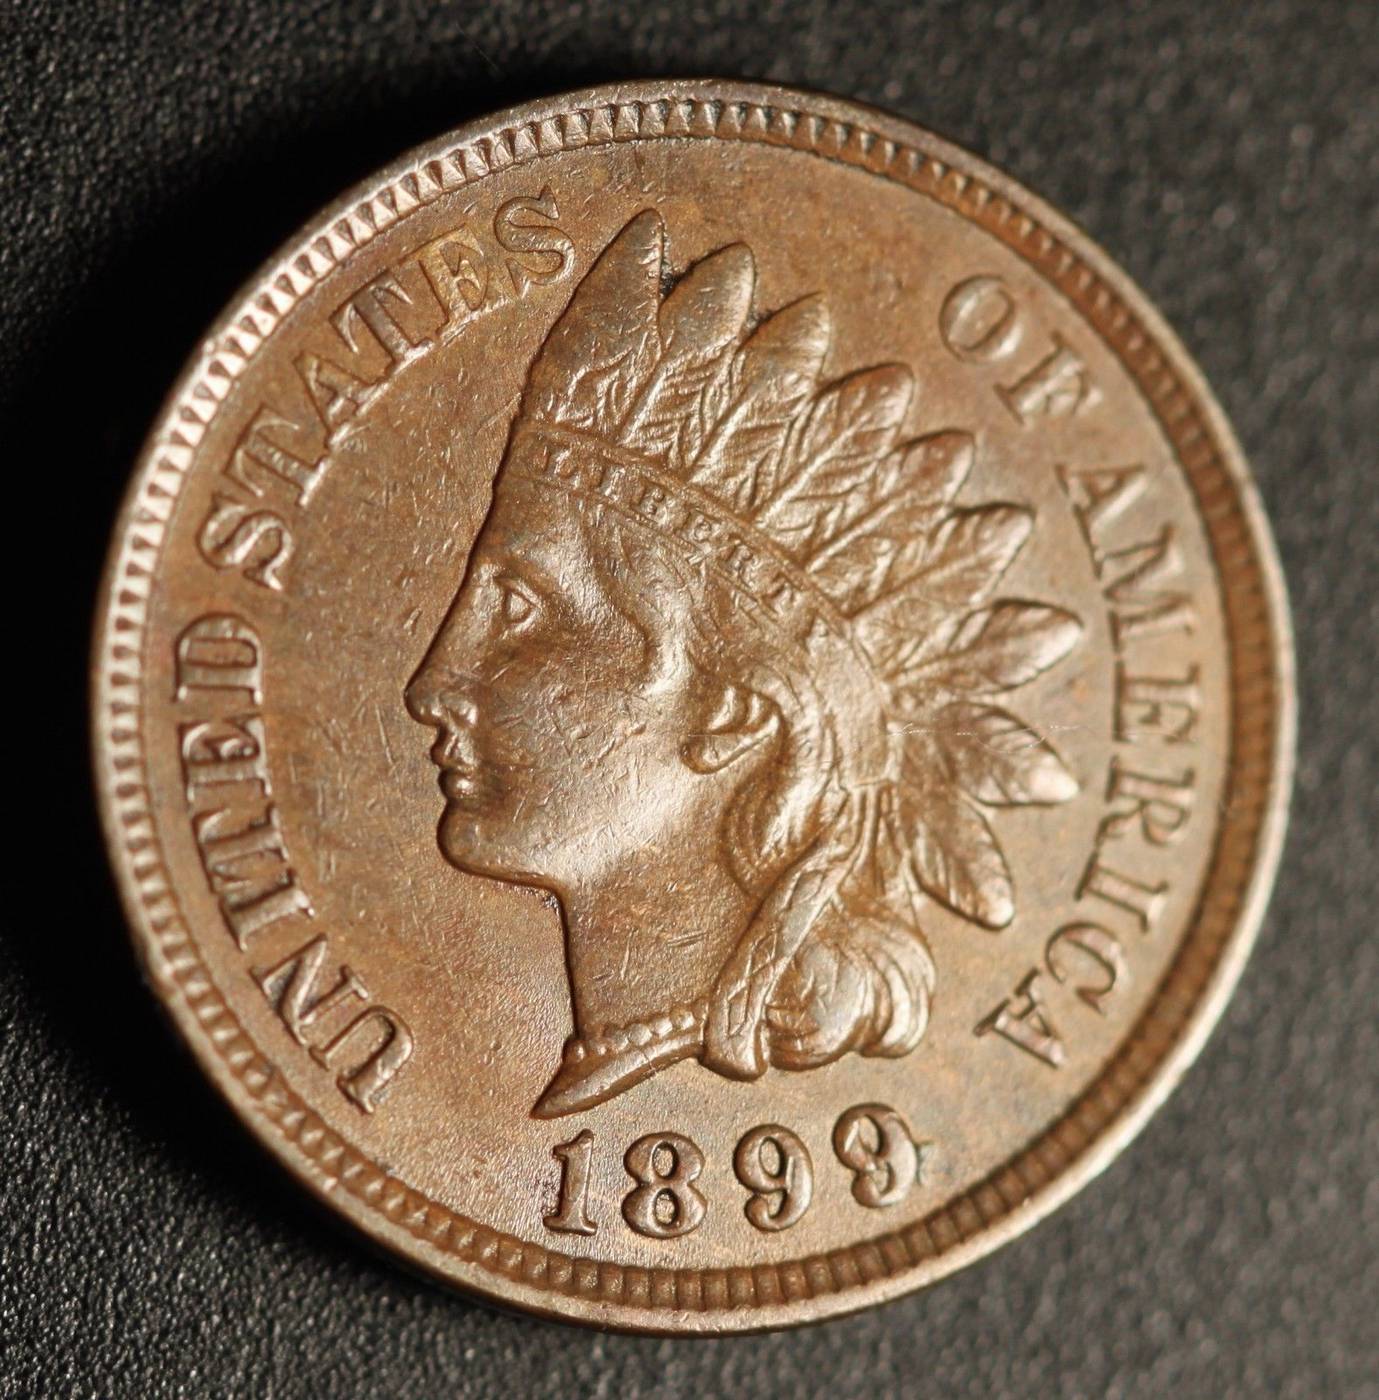 1899 RPD-019 - Indian Head Penny - Photo by Ed Nathanson